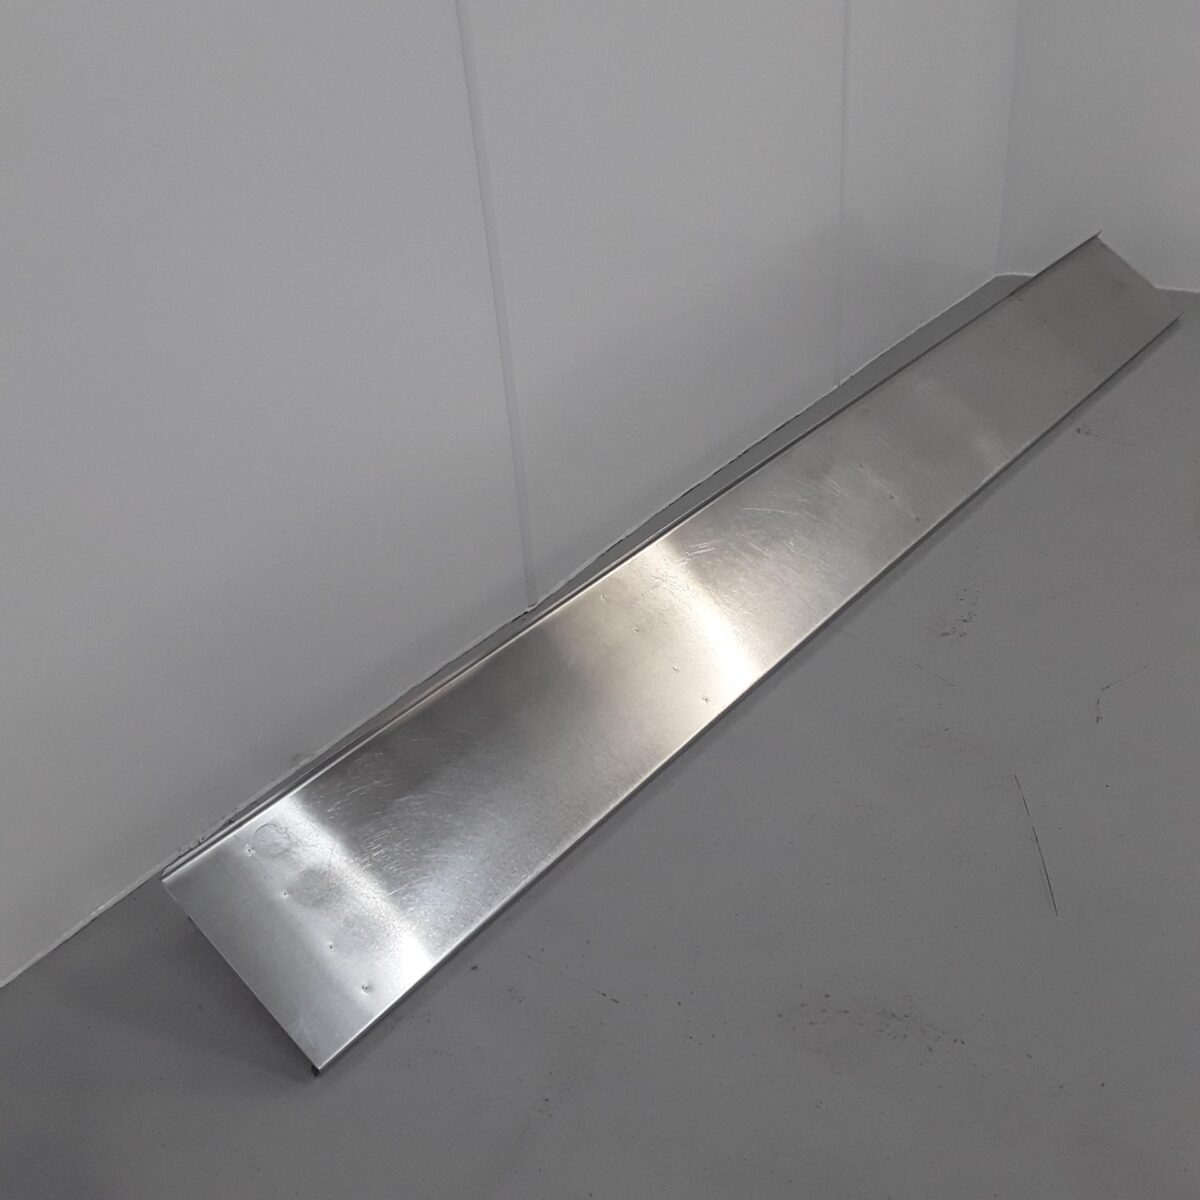 Used   Stainless Wall Shelf For Sale